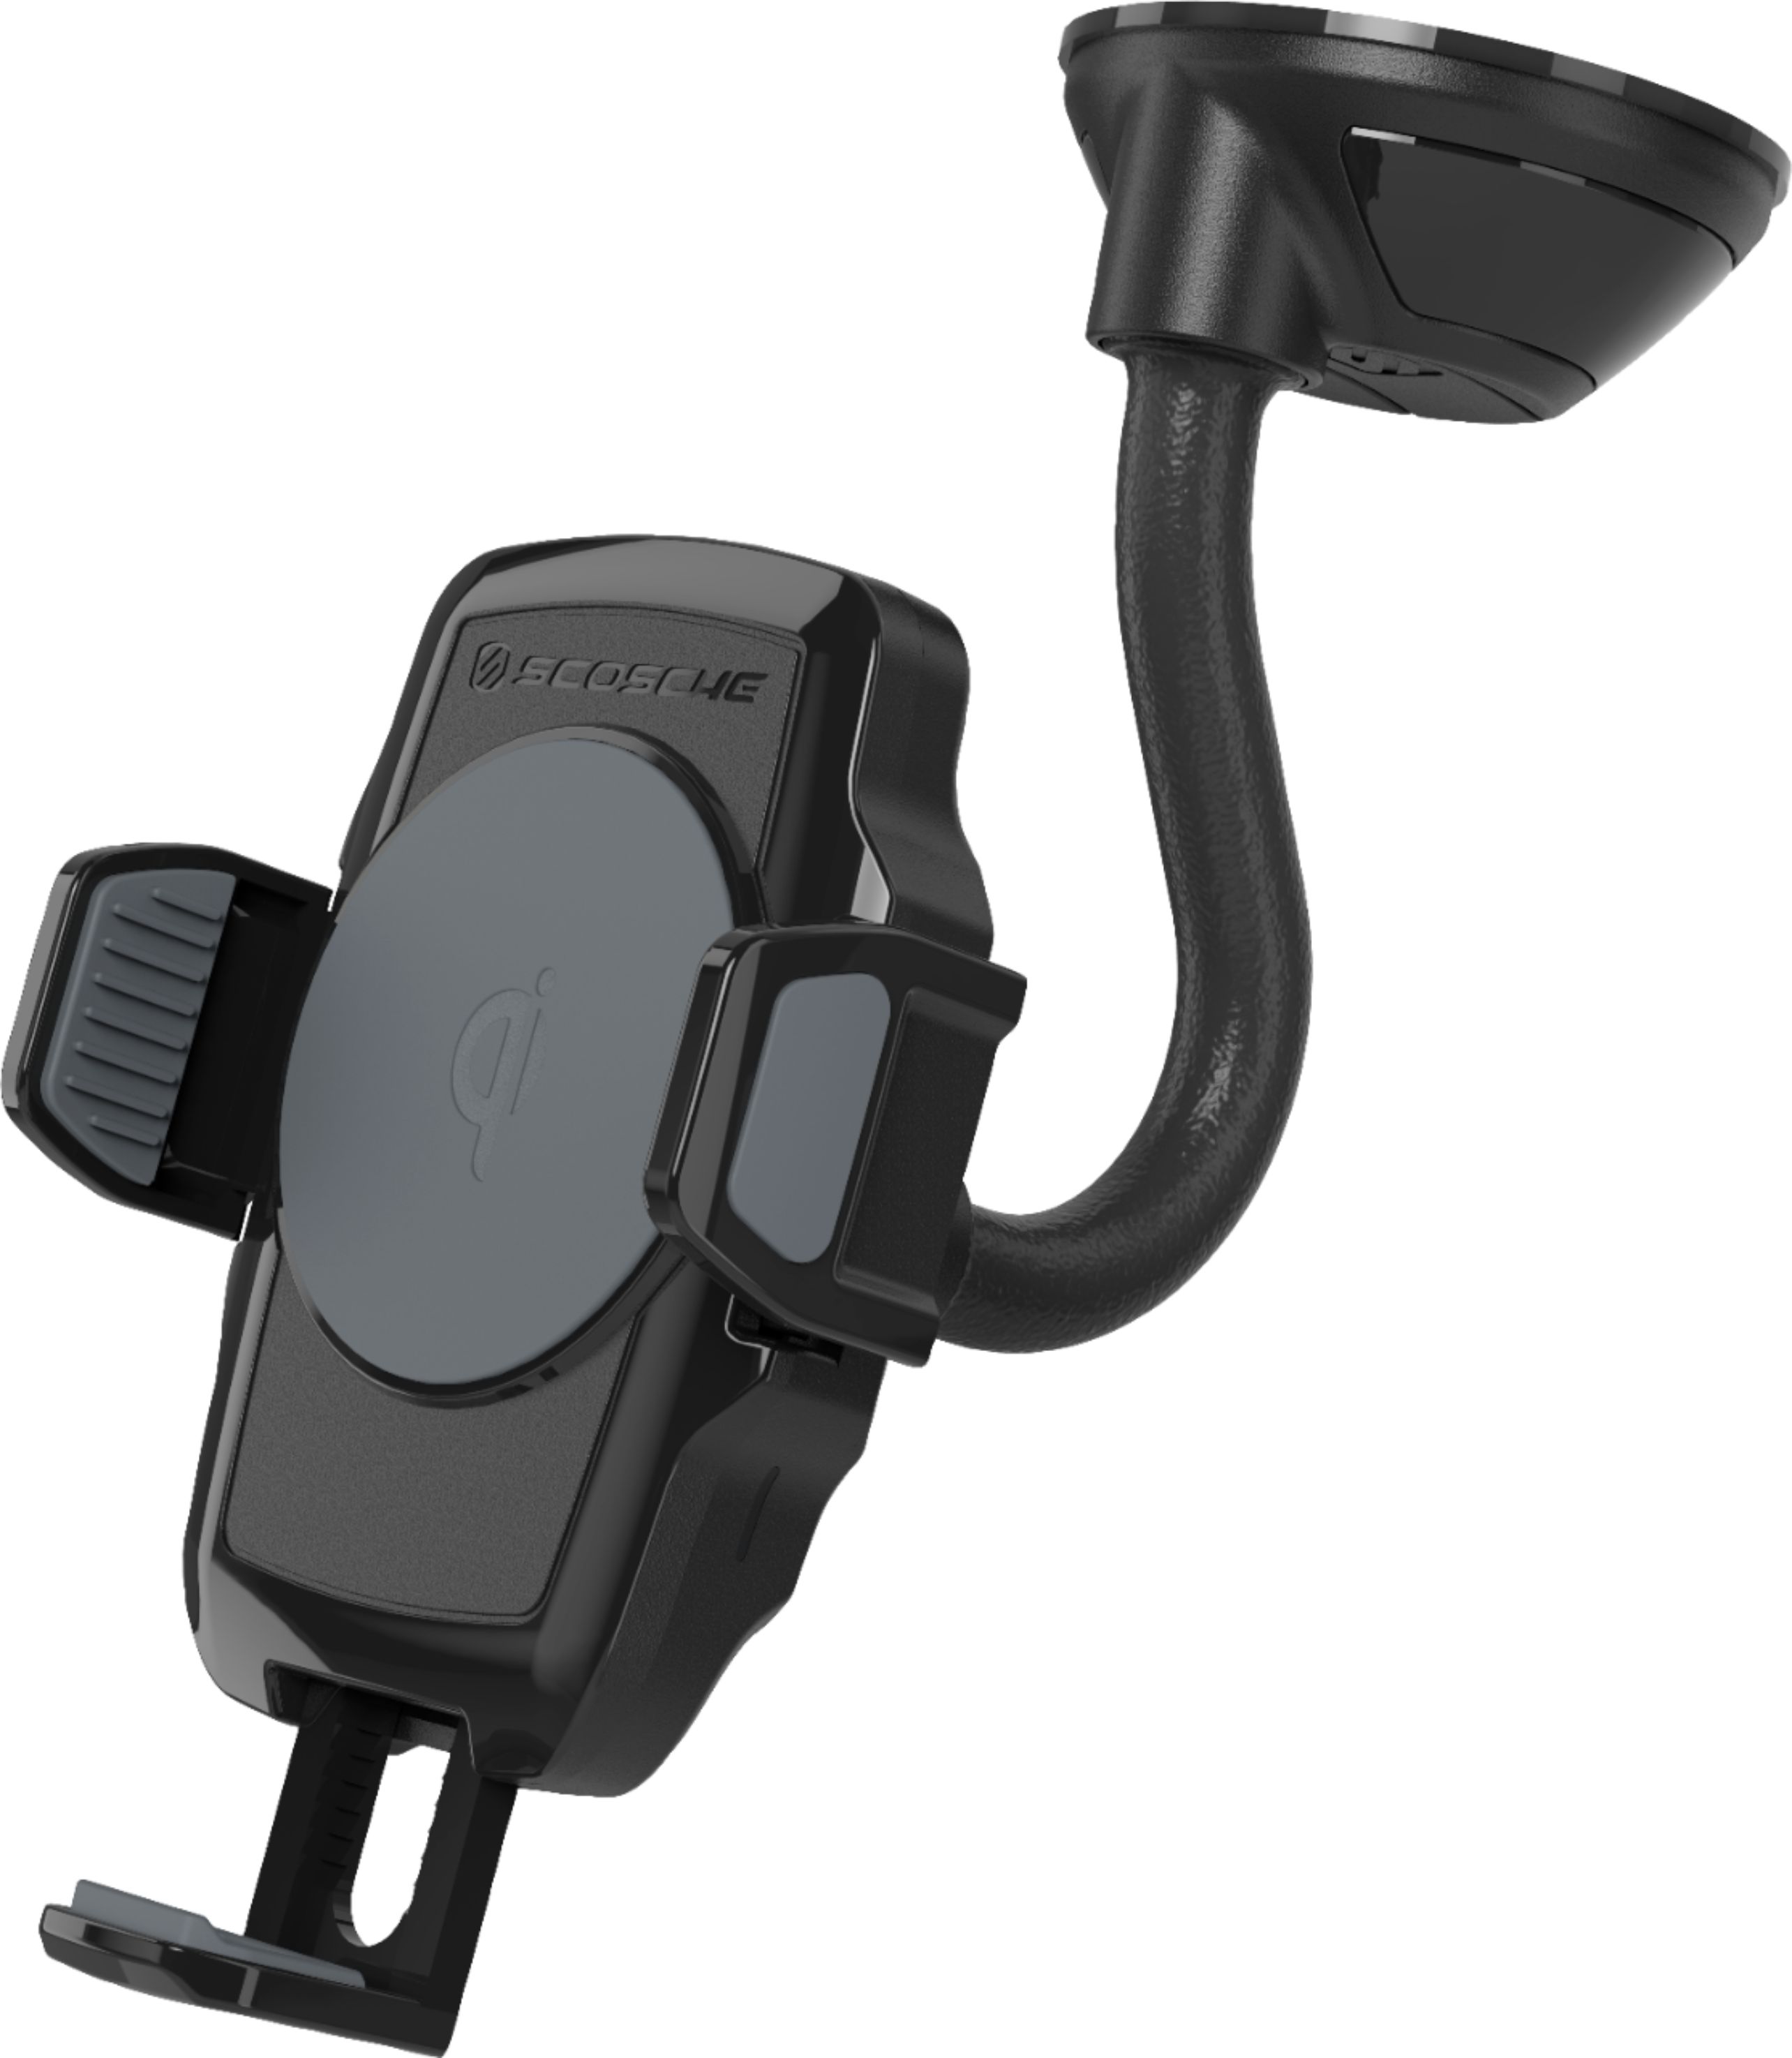 Scosche - Vehicle Mount for Mobile Devices - Black